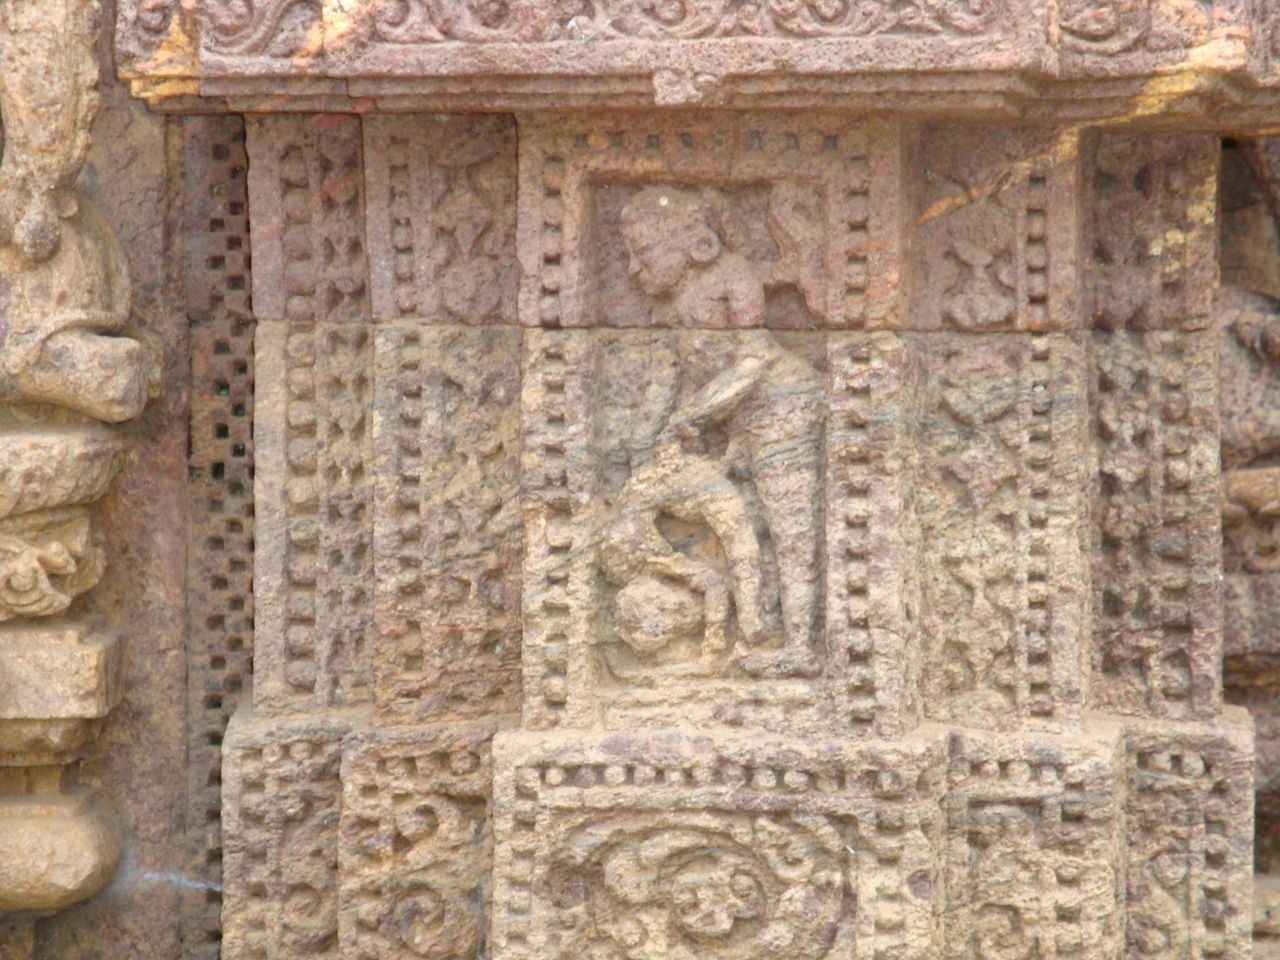 CLOSE-UP OF ORNATE CARVING ON WALL OF BUILDING